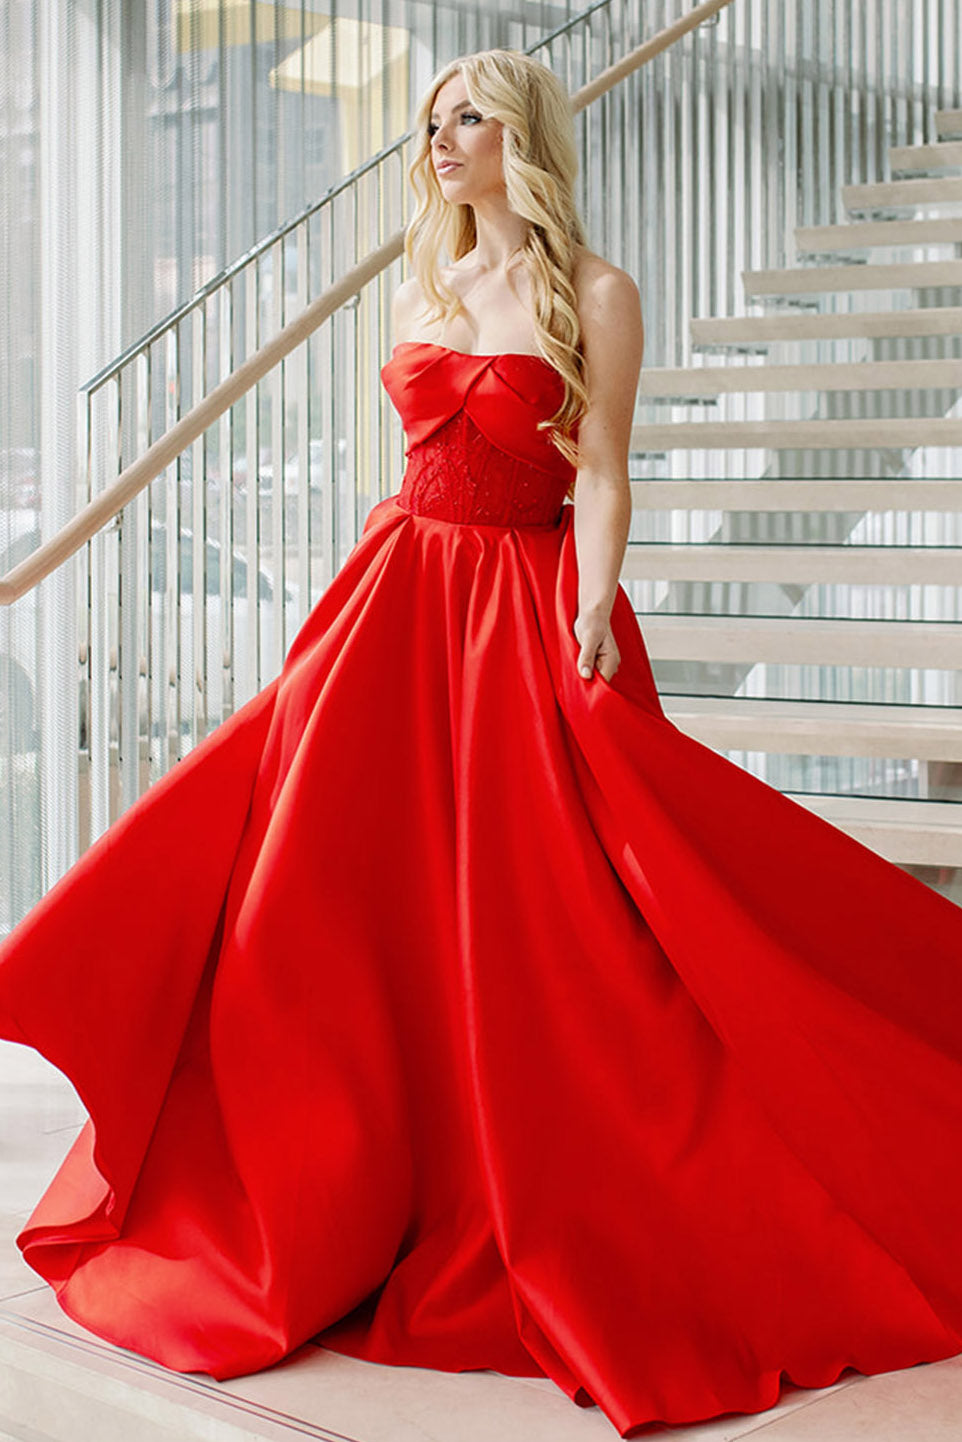 Buy Ball Gown Strapless, Lace Ball Gown, Strapless Ball Gown Floor Length,  Satin & Lace Ball Dress, Formal Dress Women, Elegant Evening Gown Online in  India 